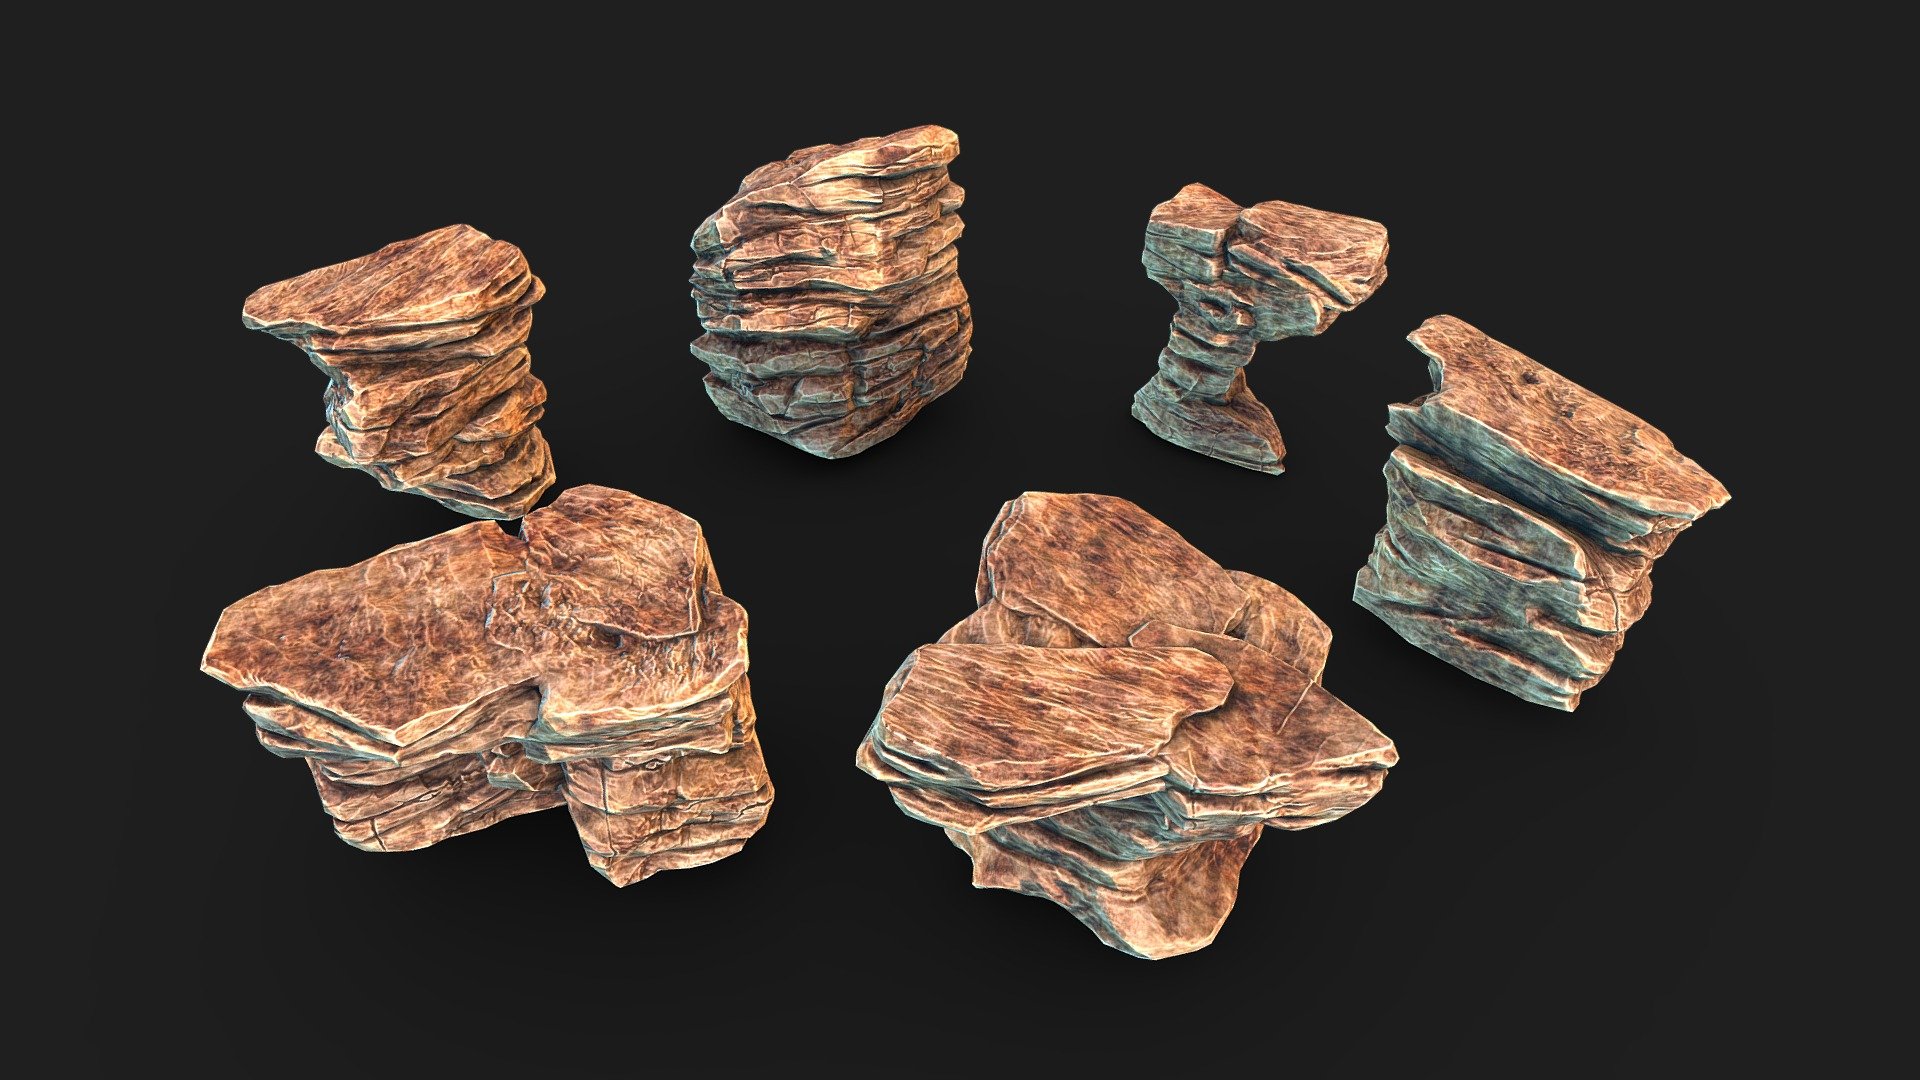 A portion of assets from the Canyon Mining Environment Pack.

Optimized for use in realtime and baked from sculpted high-poly models for highest possible normal and AO map quality.

Textures come in 2k resolution and include Albedo, Normal, Roughness and AO 3d model